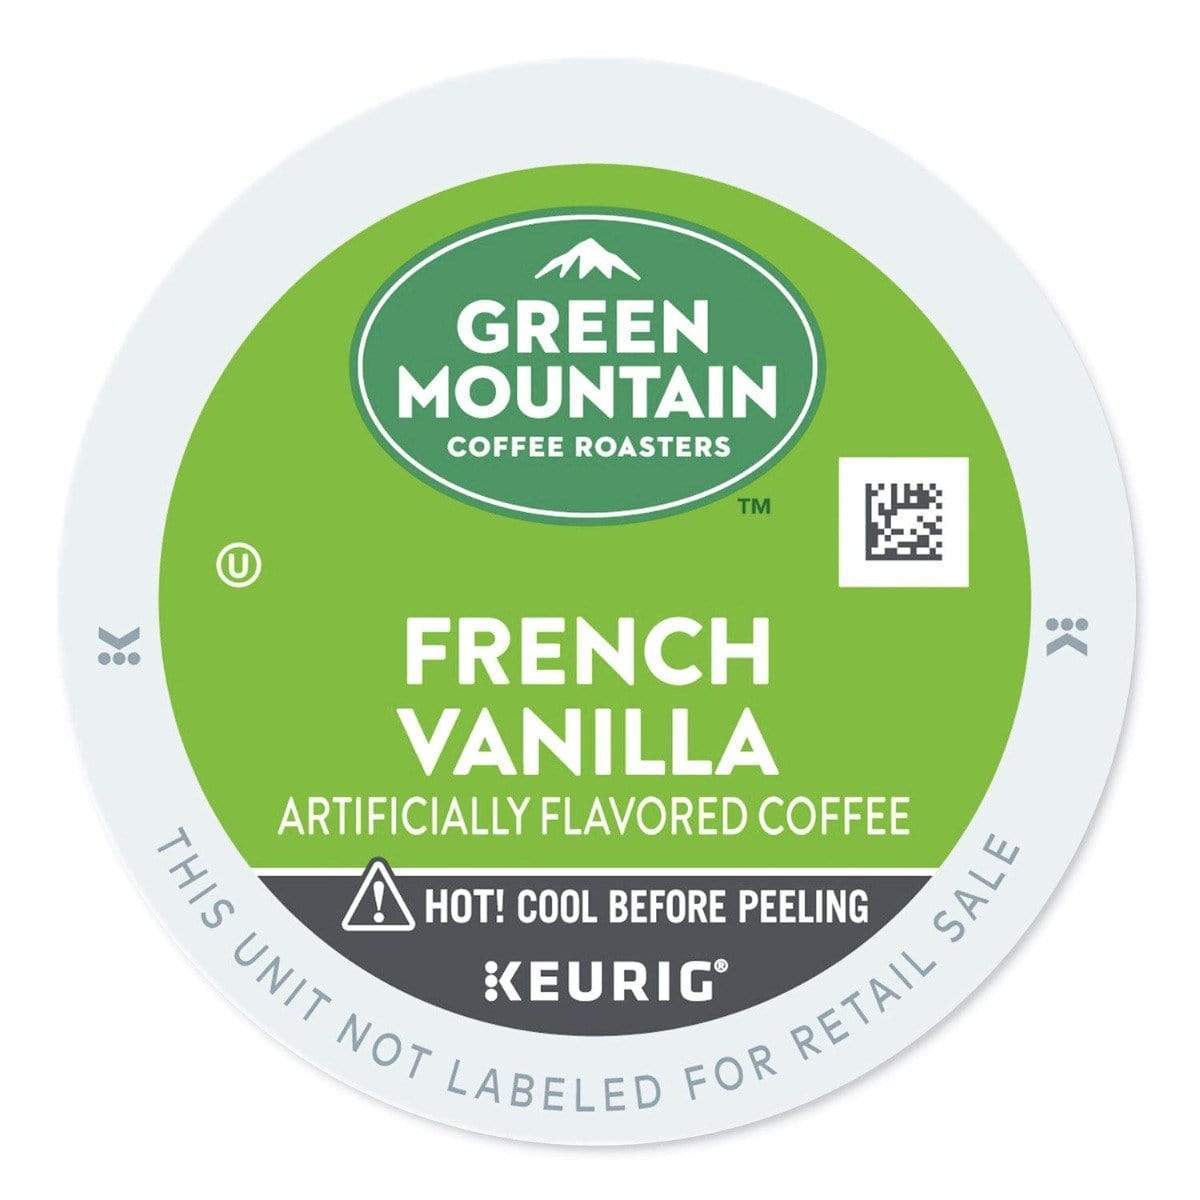 Green Mountain Coffee Coffee Green Mountain Coffee Roasters French Vanilla - 24 Count Box